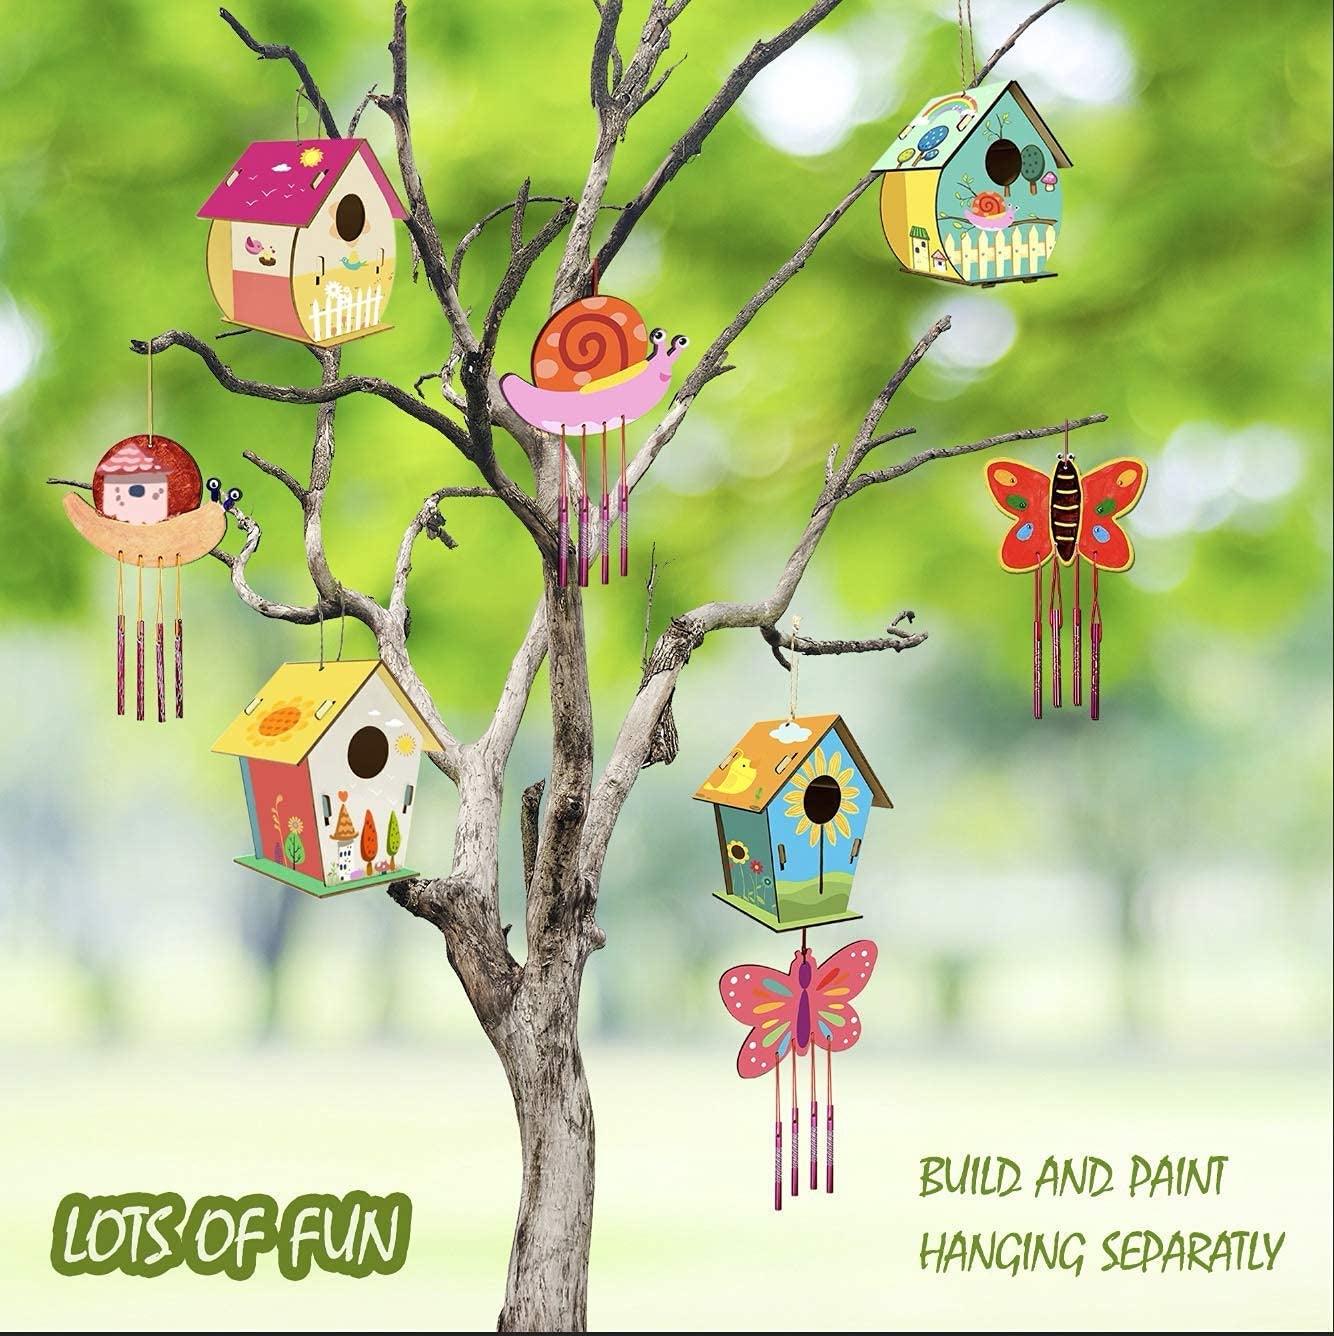 4 Pack DIY Bird House Wind Chime Kits for Children to Build and Paint, Wooden Arts and Crafts - WoodArtSupply